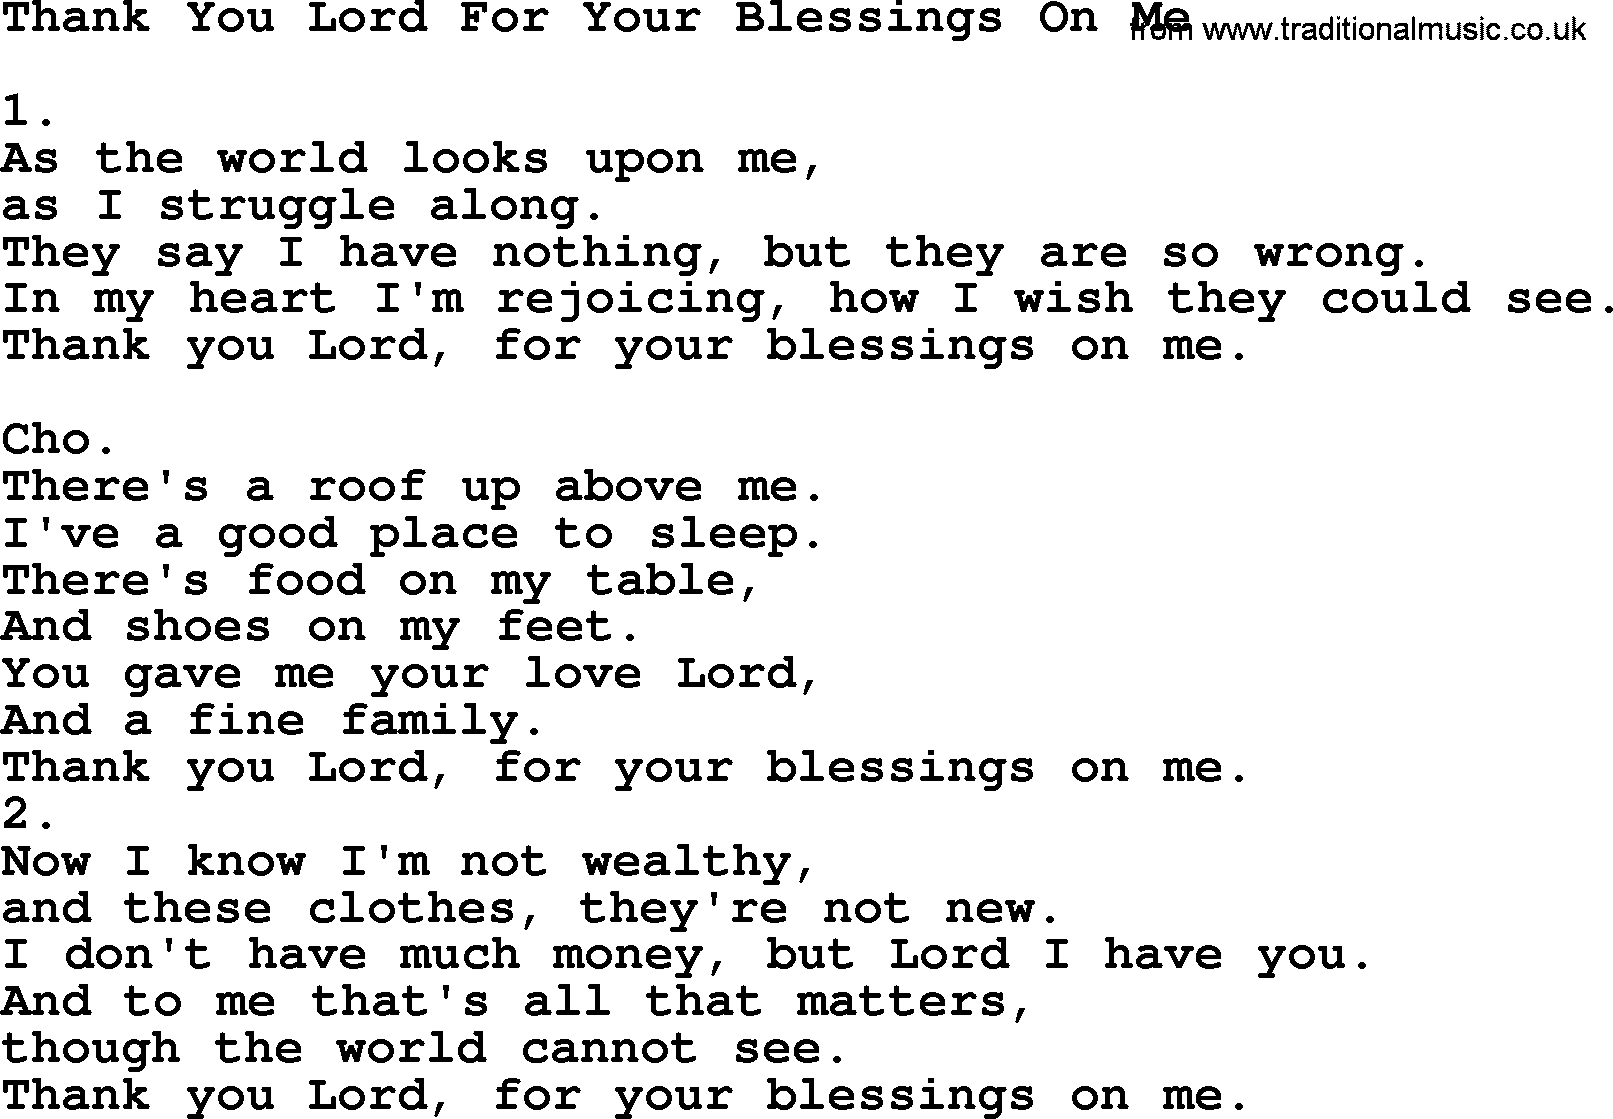 Apostolic & Pentecostal Hymns and Songs, Hymn: Thank You Lord For Your Blessings On Me lyrics and PDF